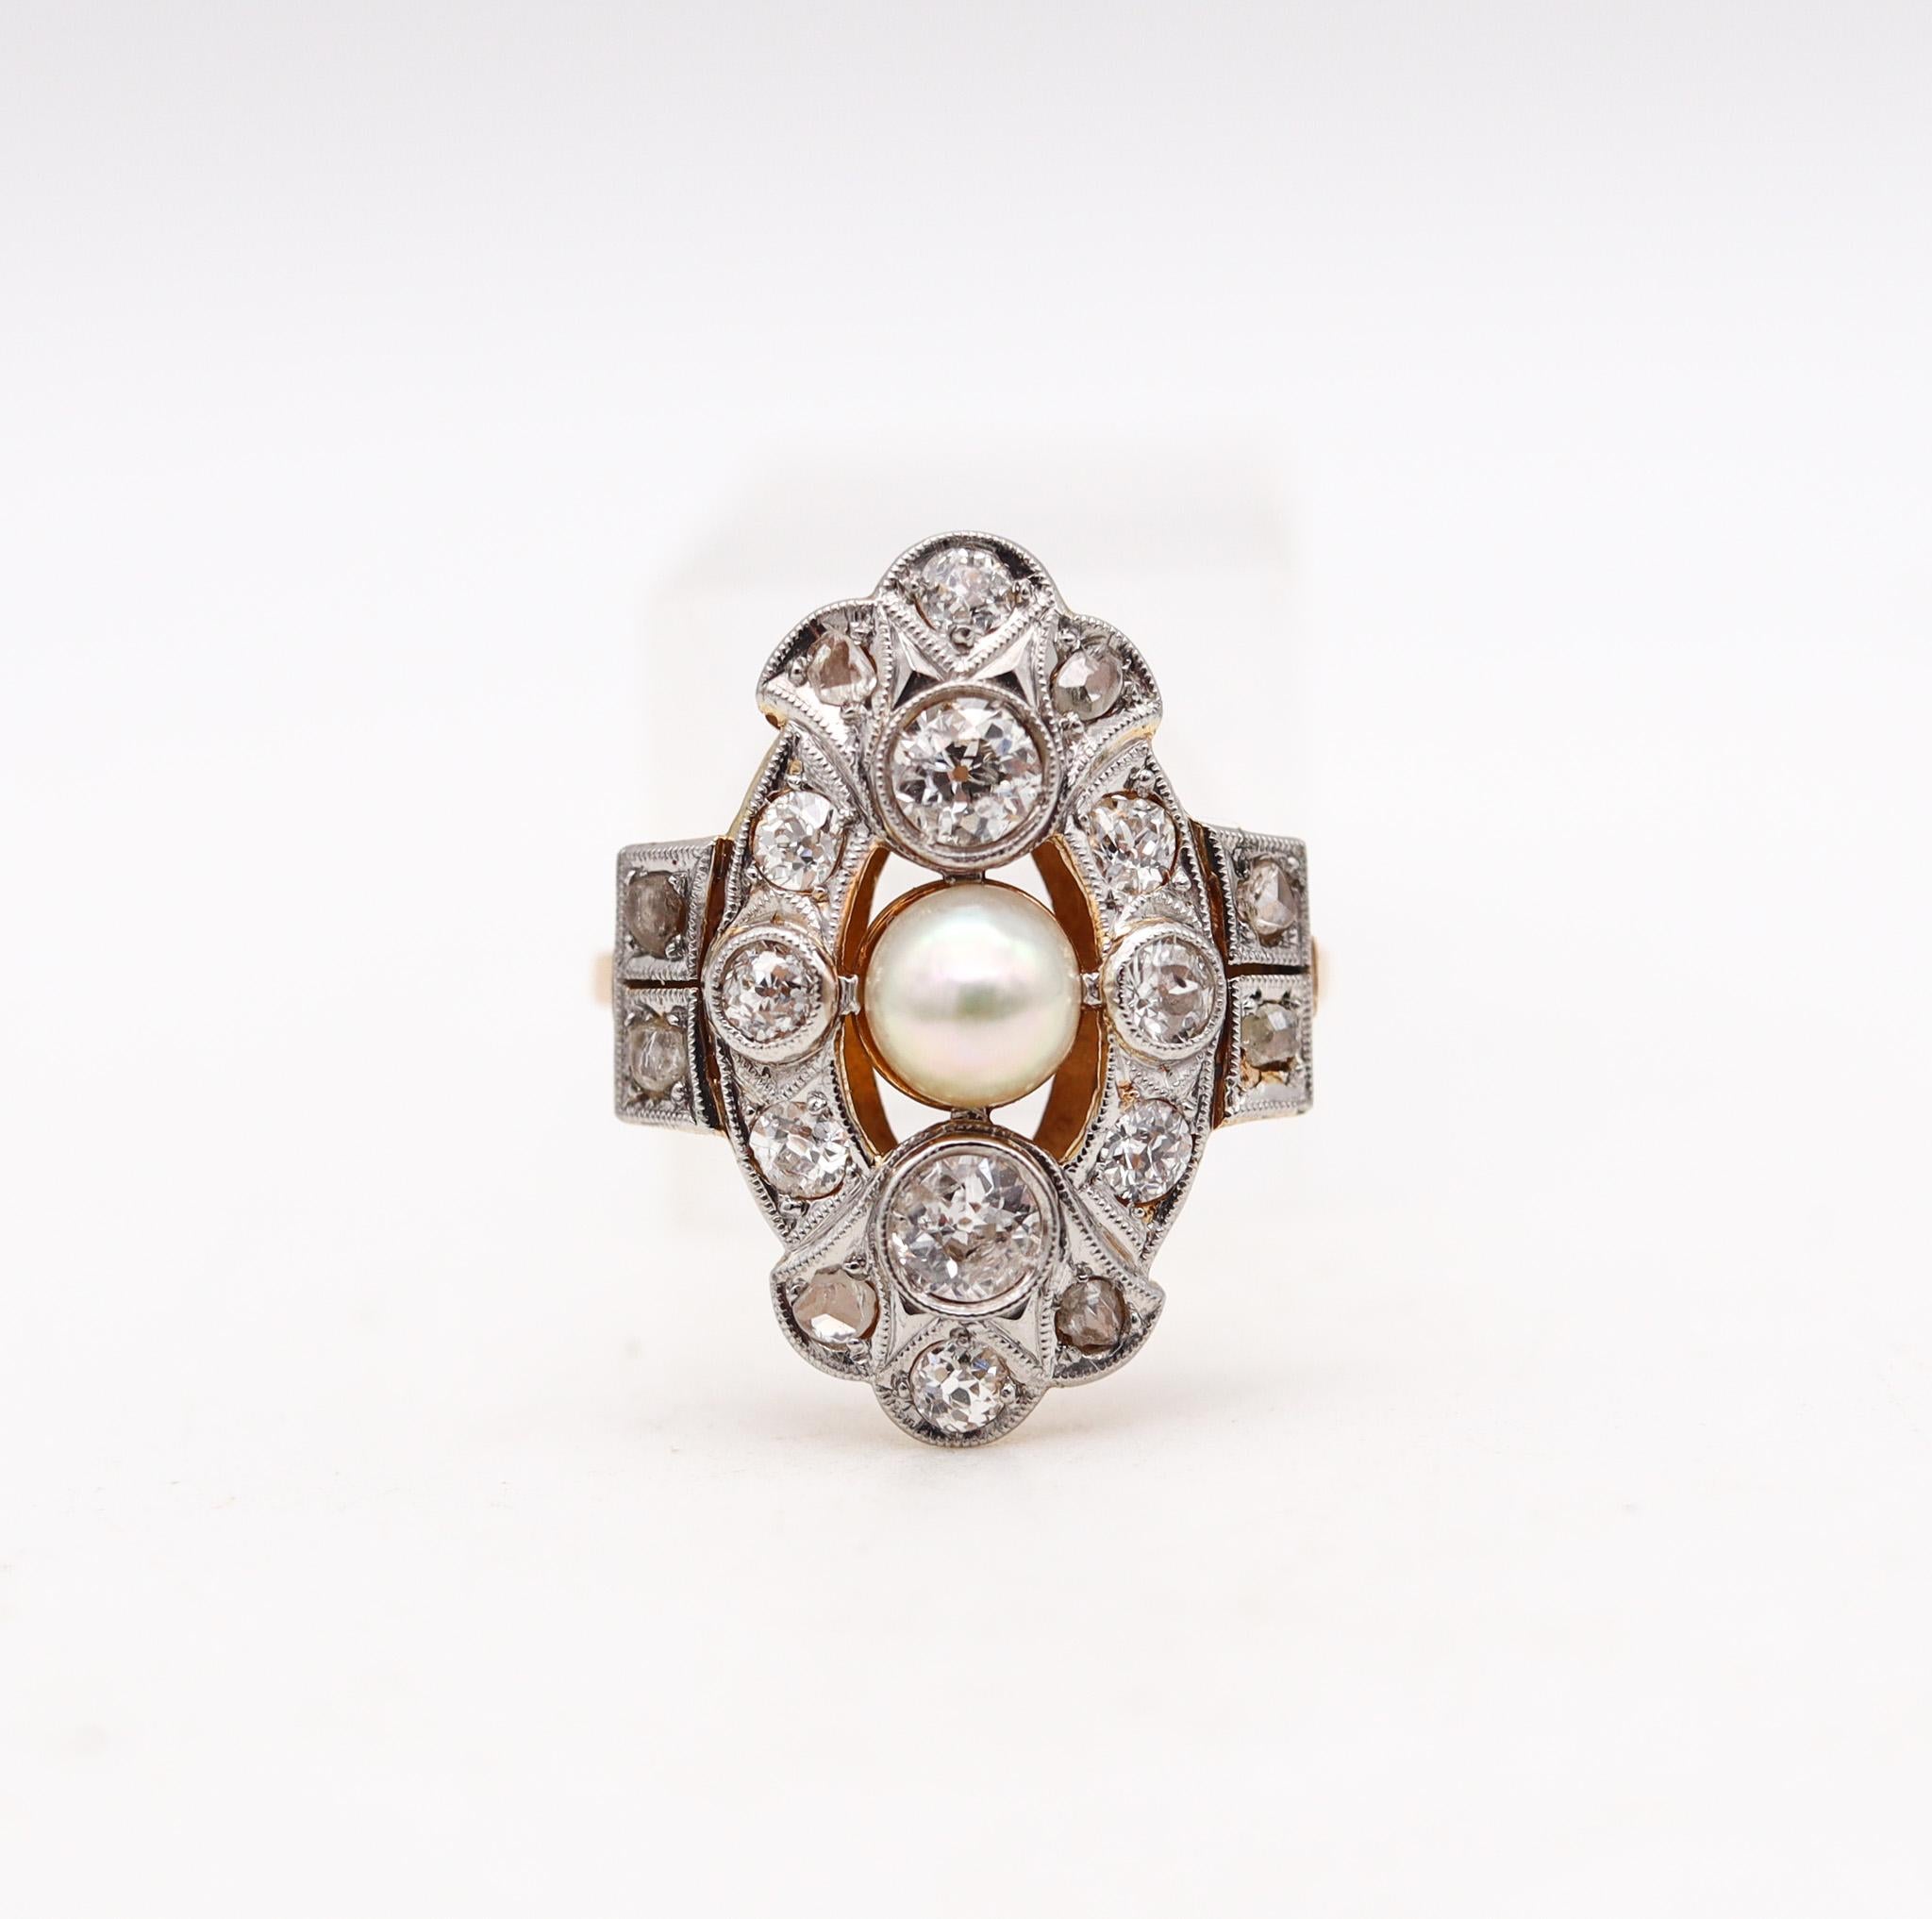 Edwardian ring with diamonds and natural pearl.

A beautiful ring from the Belle Epoque period, created during the Edwardian period, back in the 1910. This beautiful ring was crafted in solid Yellow gold of 18 karats and topped with white gold for